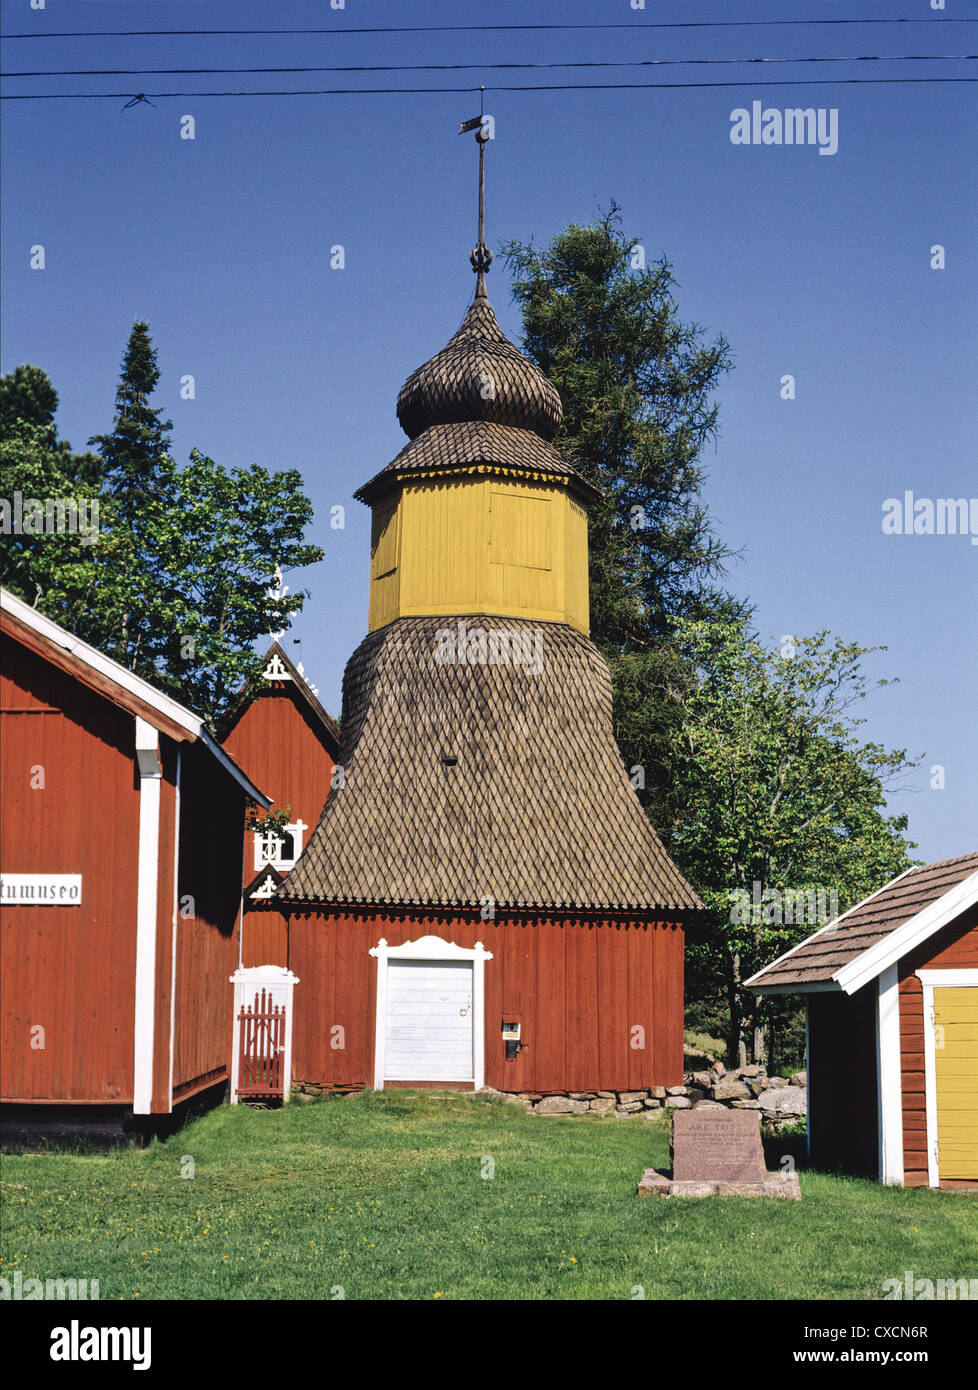 The Irjanne Church was built in 1731, and the belfry was built in 1758 in Eurajoki, Finland. Stock Photo